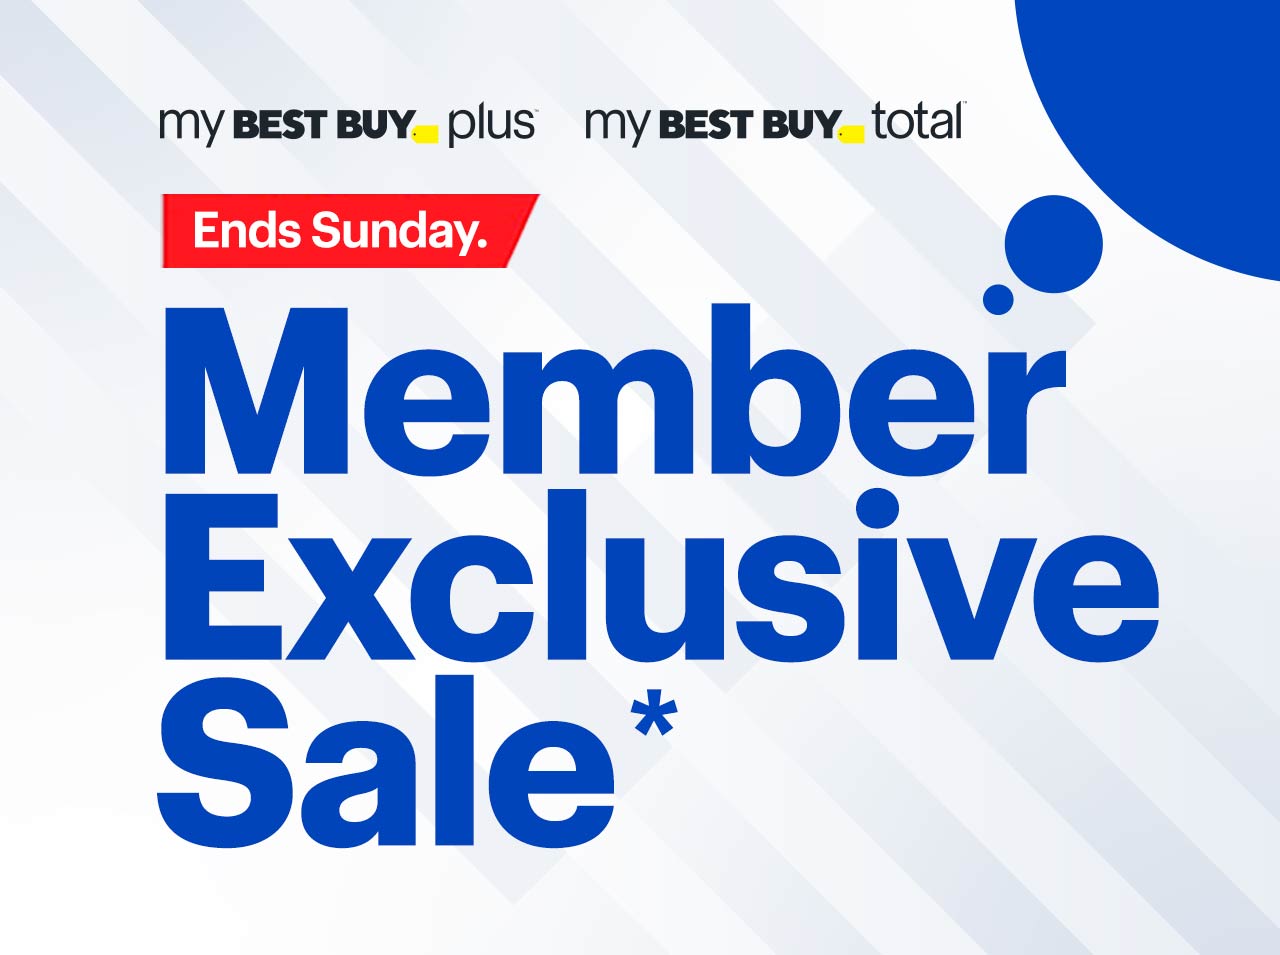 My Best Buy plus, My Best Buy total member-exclusive sale. Ends Sunday. Reference disclaimer.